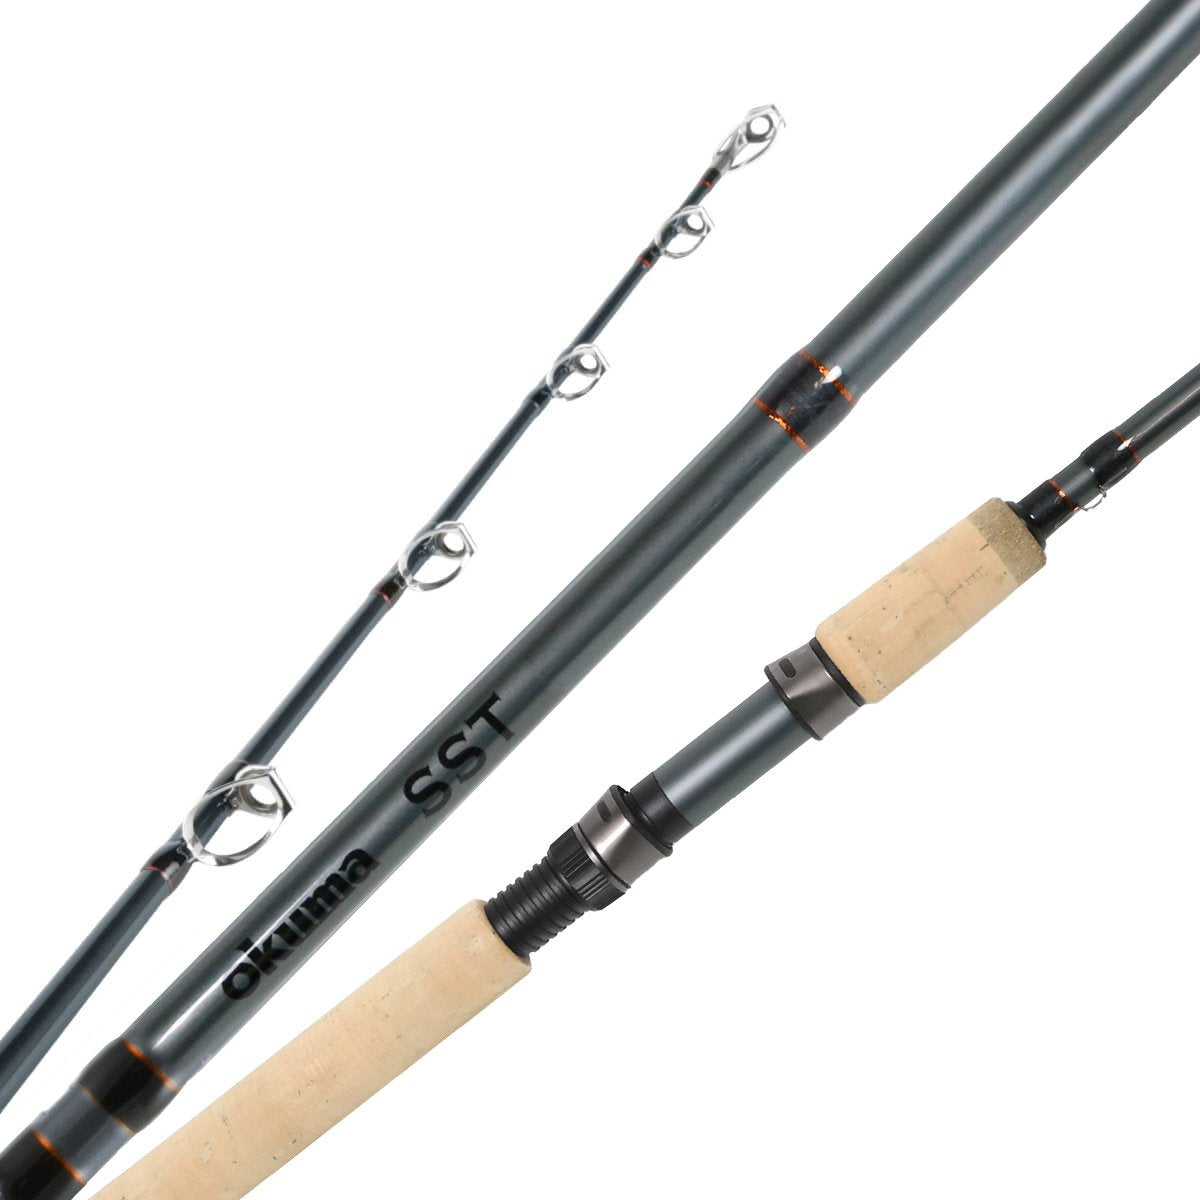 https://www.fishermanswarehouse.com/mfiles/product/image/okuma_sst_series_a_trout_spinning_rod.6205568698ac7.jpg